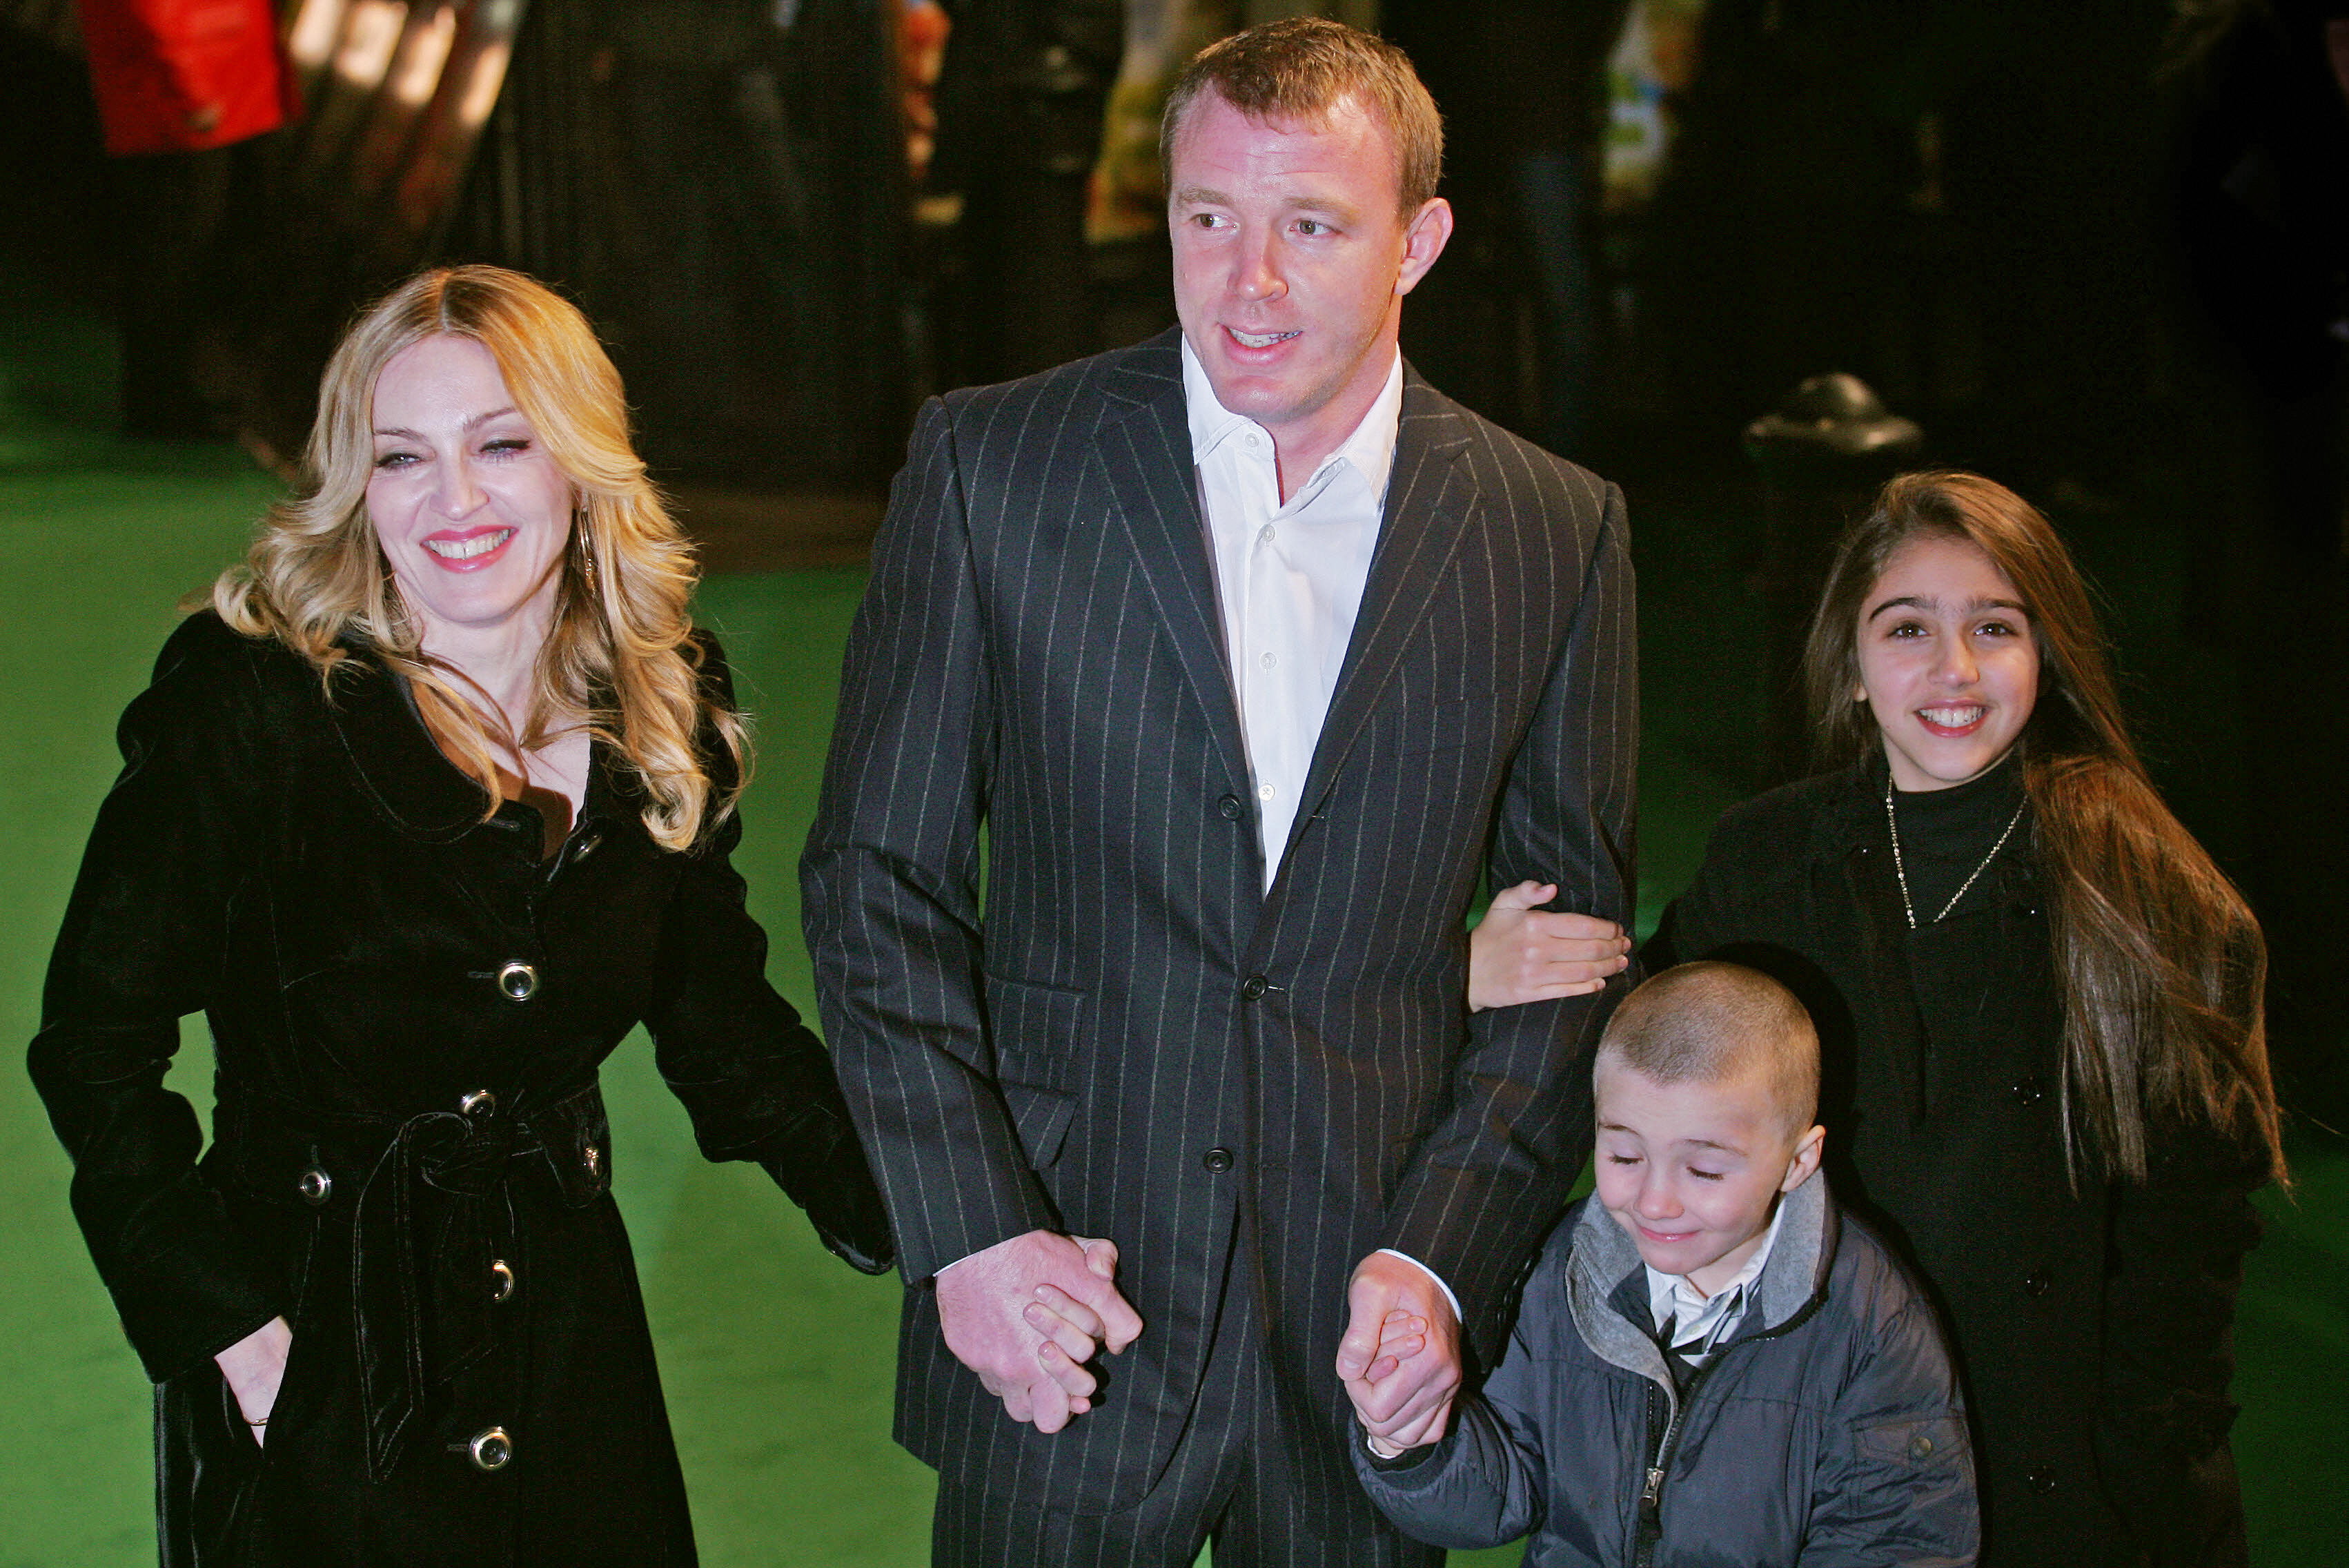 Madonna, Guy Ritchie, Rocco Ritchie, and Lourdes Leon wear black coats and hold hands.